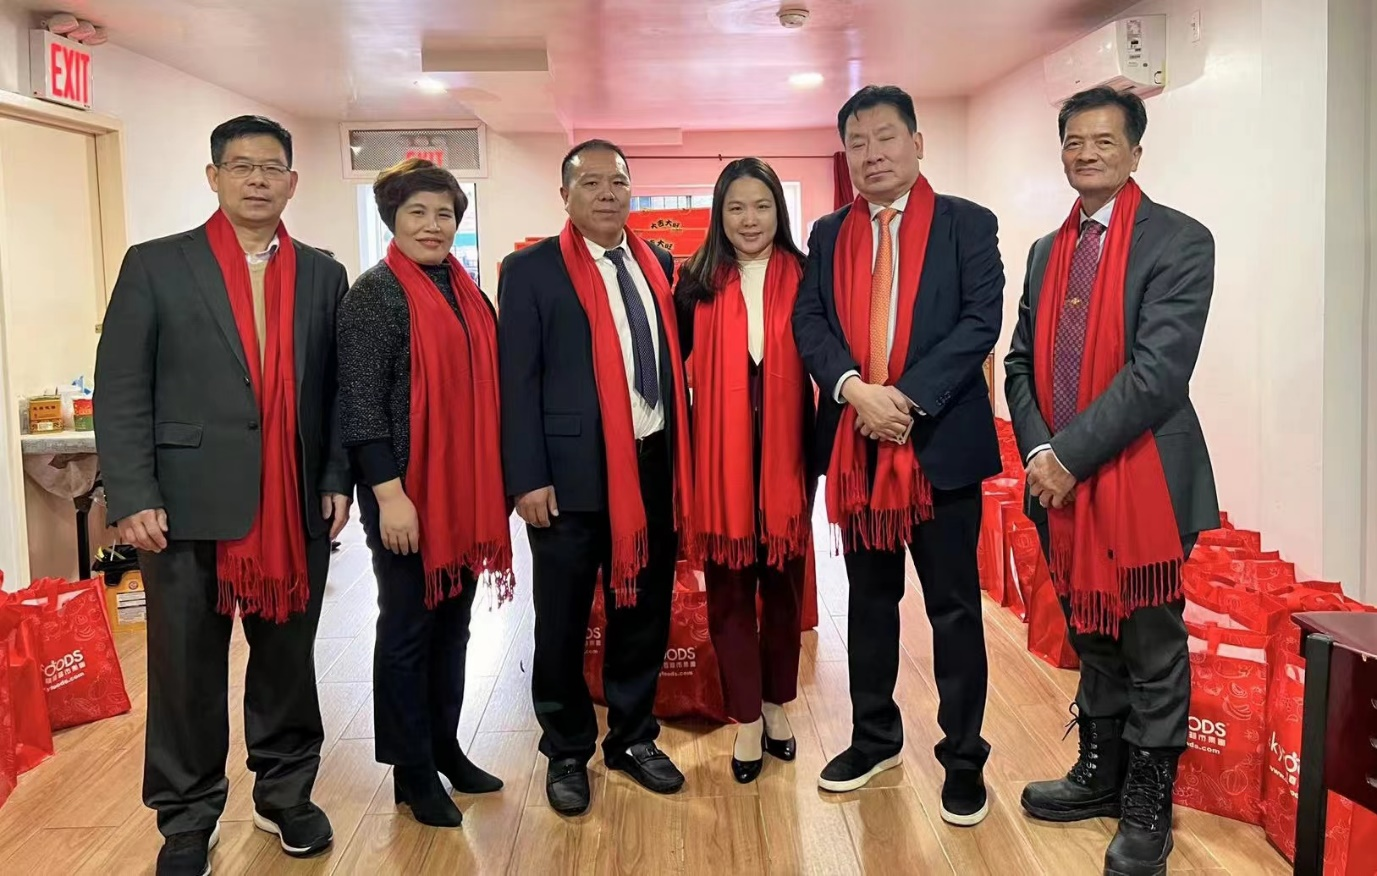 72 Lin Huabin, President of 72 Steel Group LLC, Participated in the Group Meeting "Celebrate the New Year of the Rabbit" Held by the Fuqing Townsmen Association in the United States.